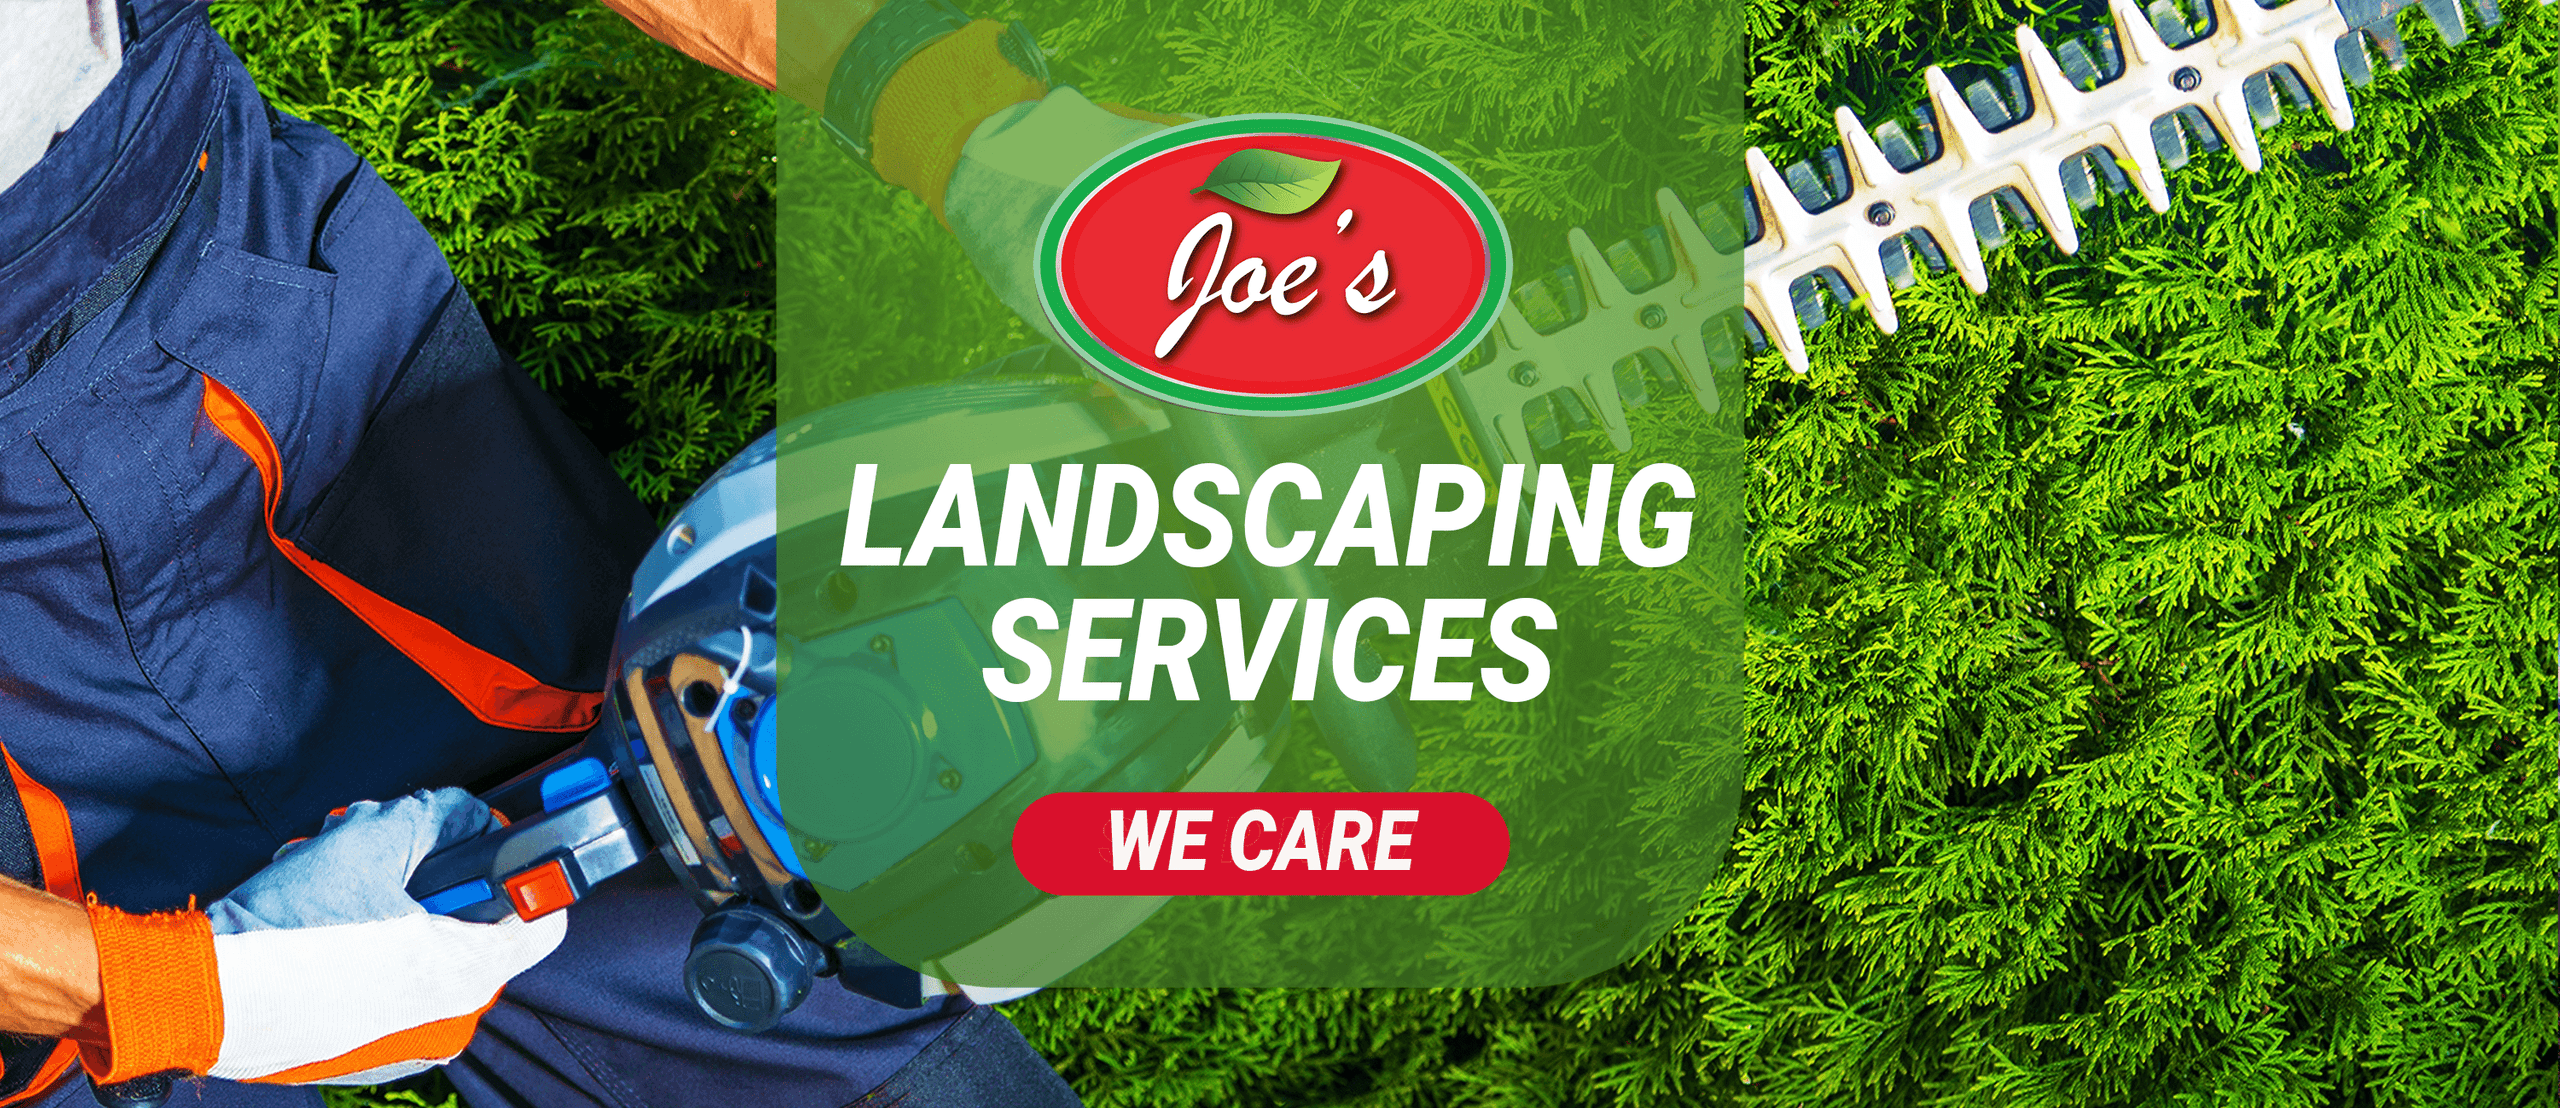 Landscaping services in tipperary